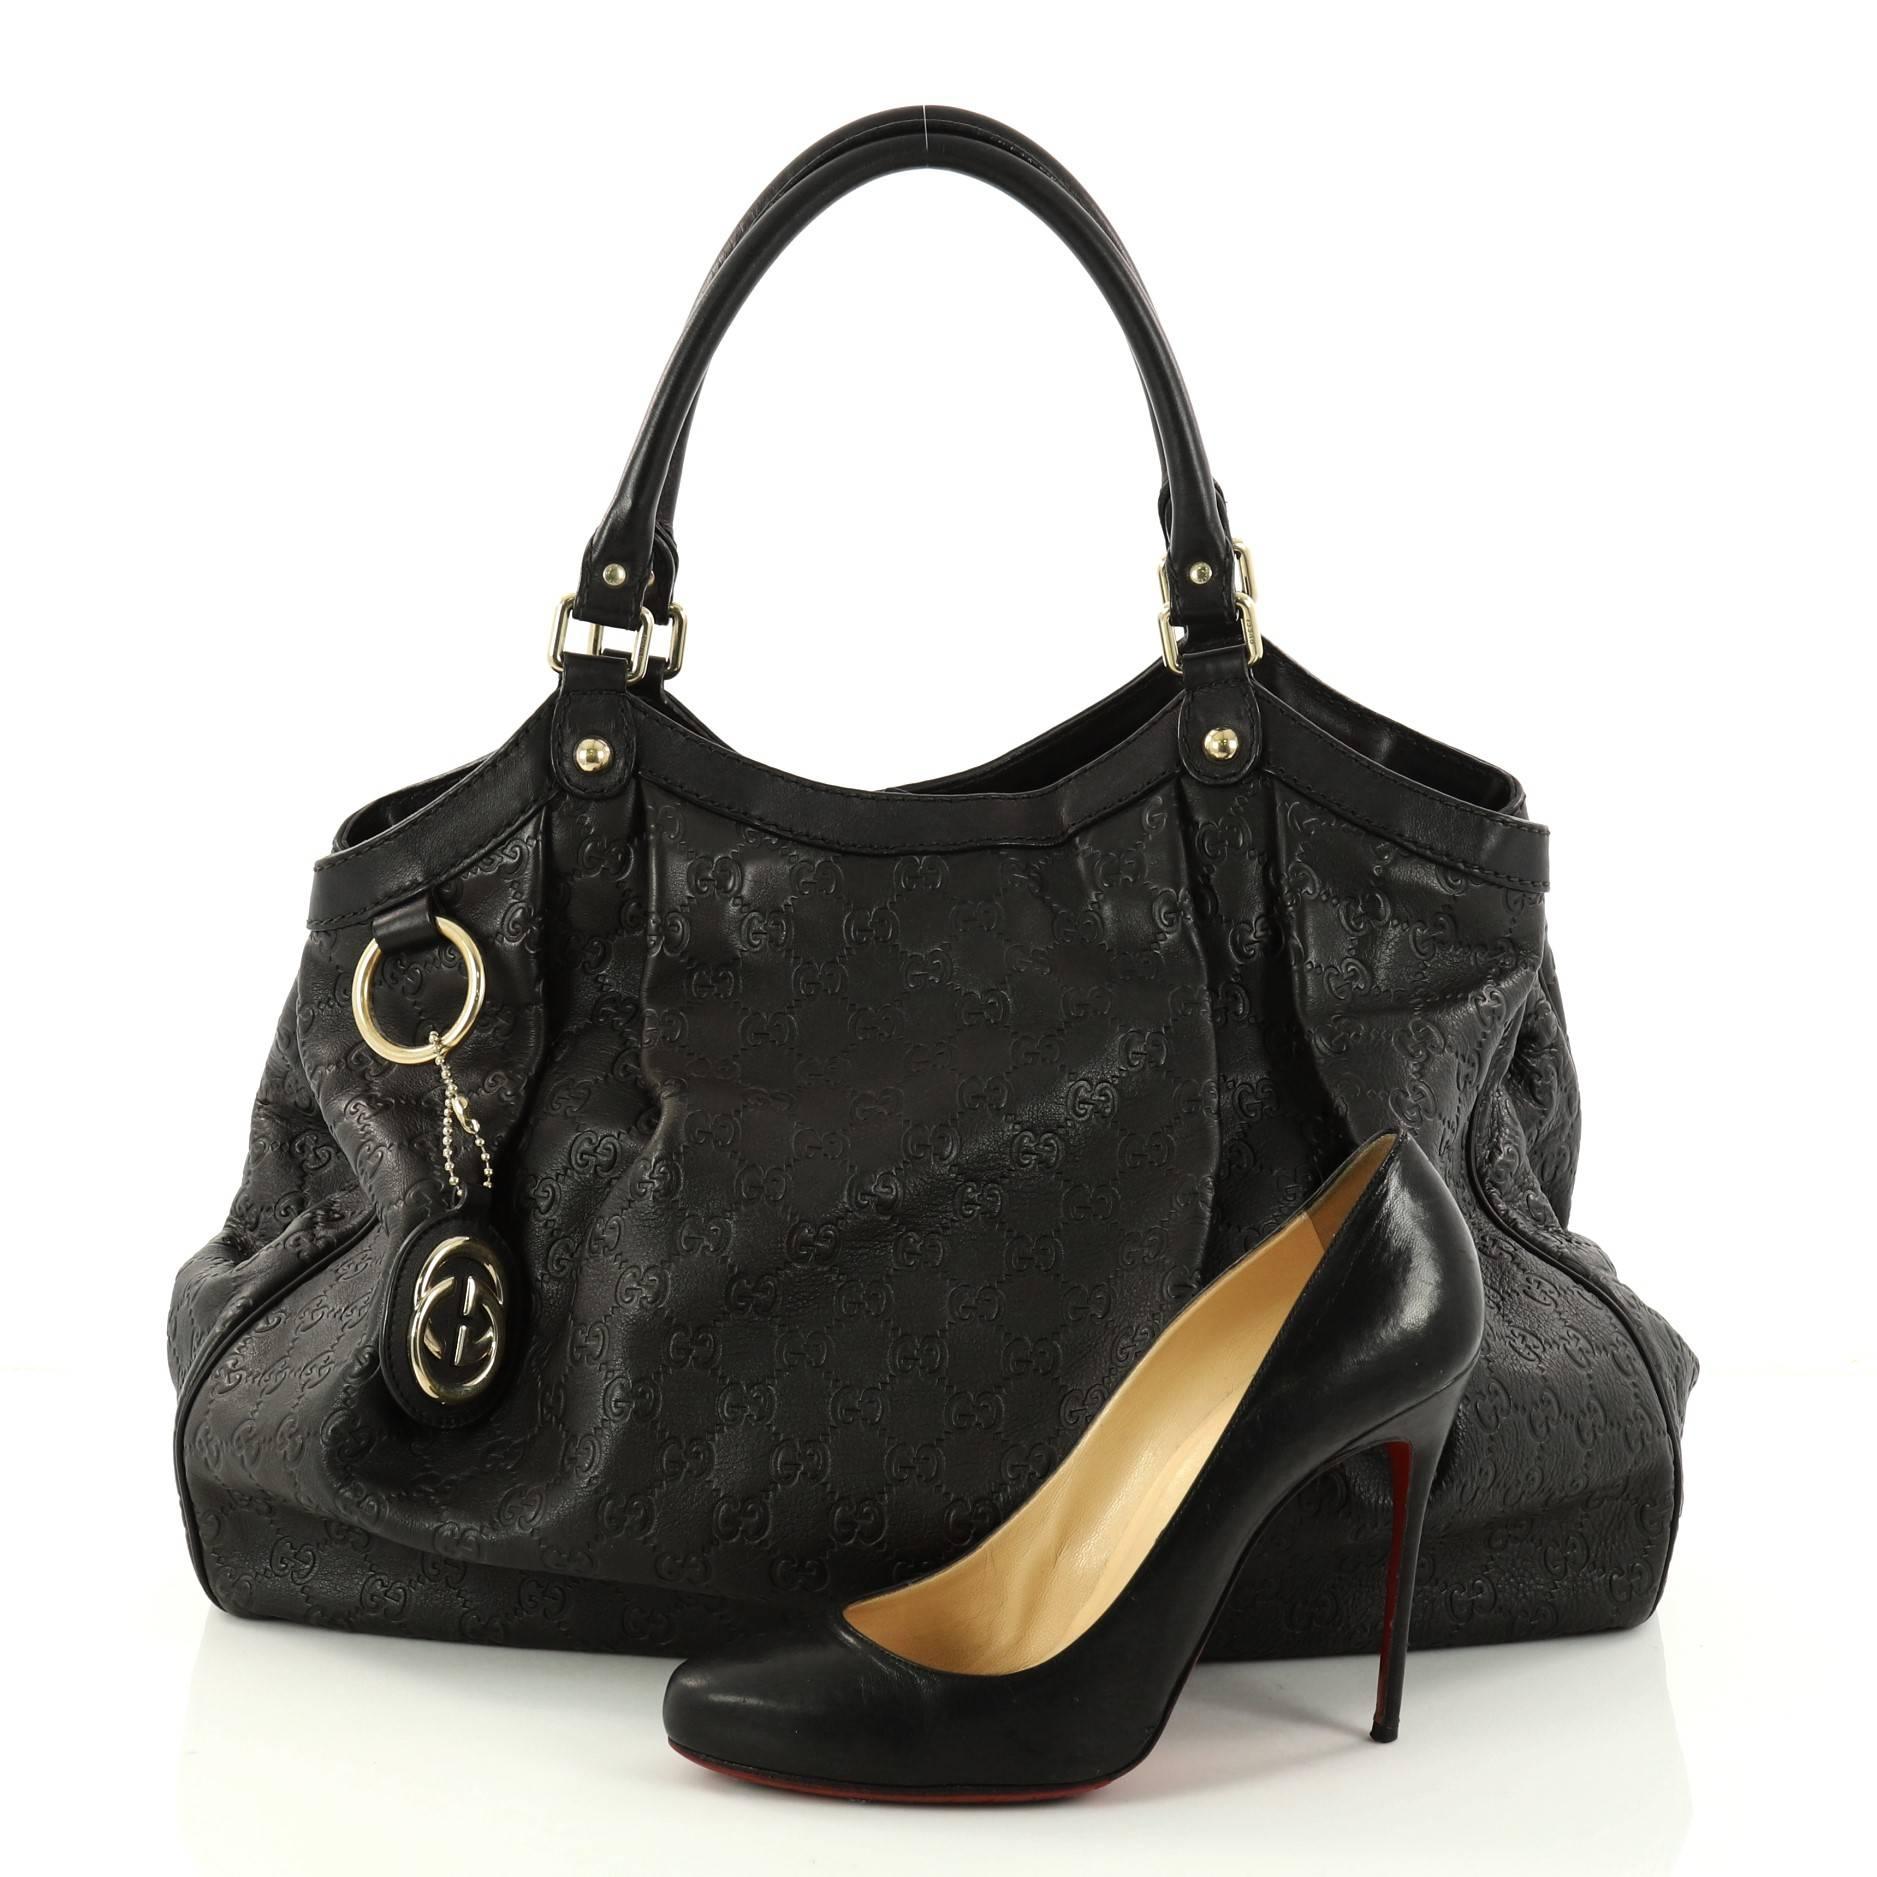 This authentic Gucci Sukey Tote Guccissima Leather Large is a chic tote ideal for your everyday wear. Crafted from black GG monogram guccissima leather, this pleated tote features dual-rolled leather top handles, side snap buttons, and gold-tone